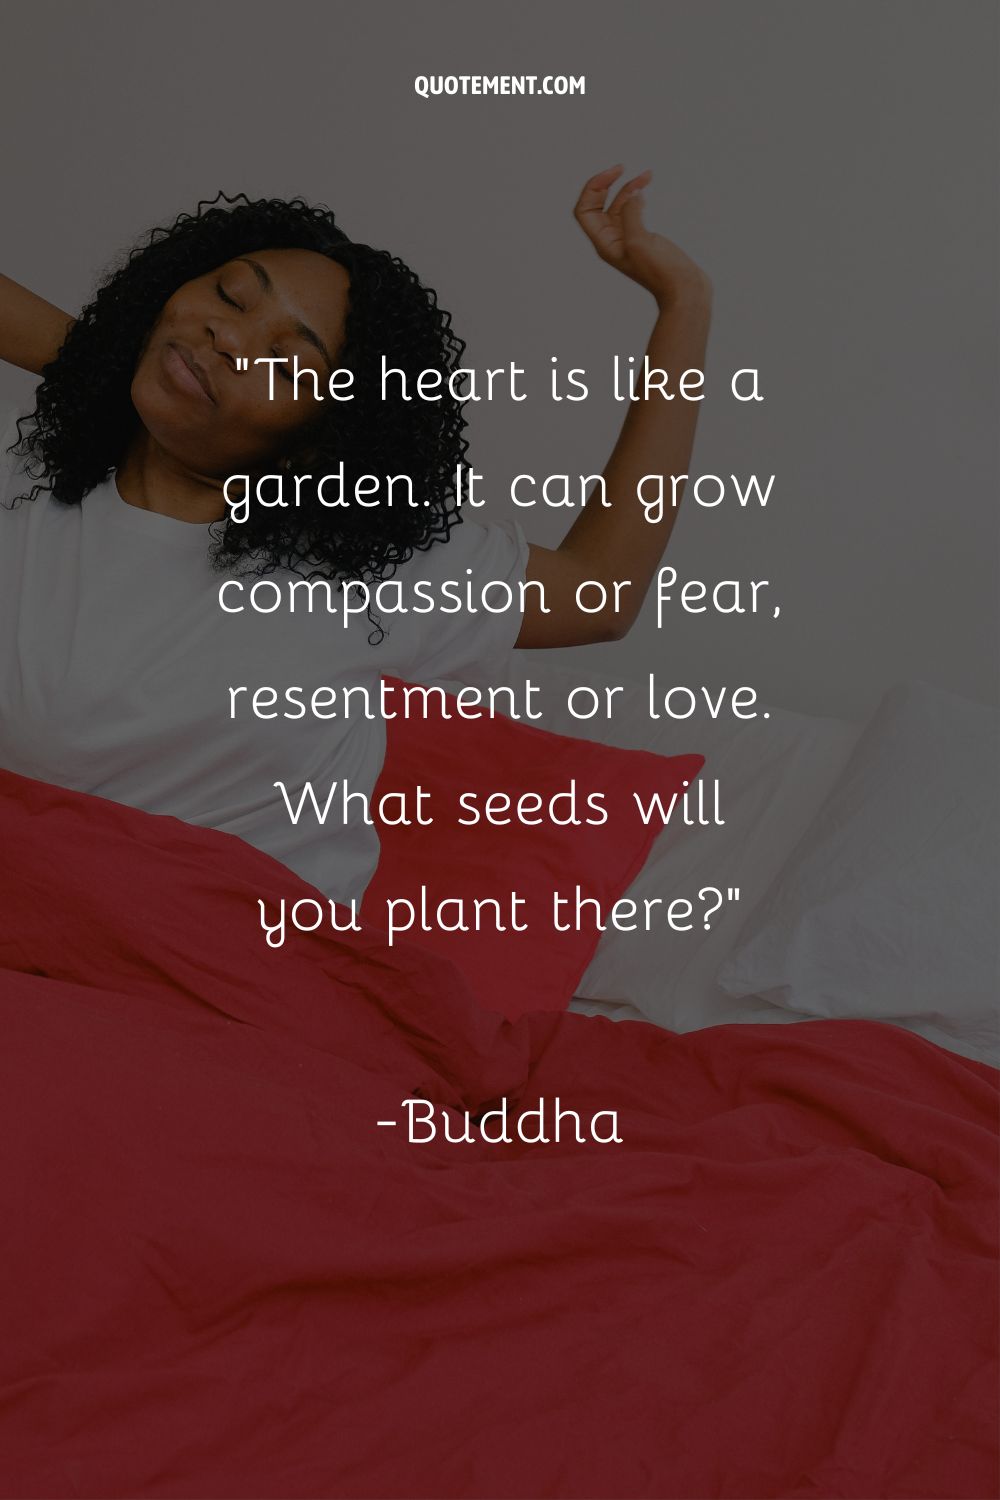 The heart is like a garden. It can grow compassion or fear, resentment or love. What seeds will you plant there